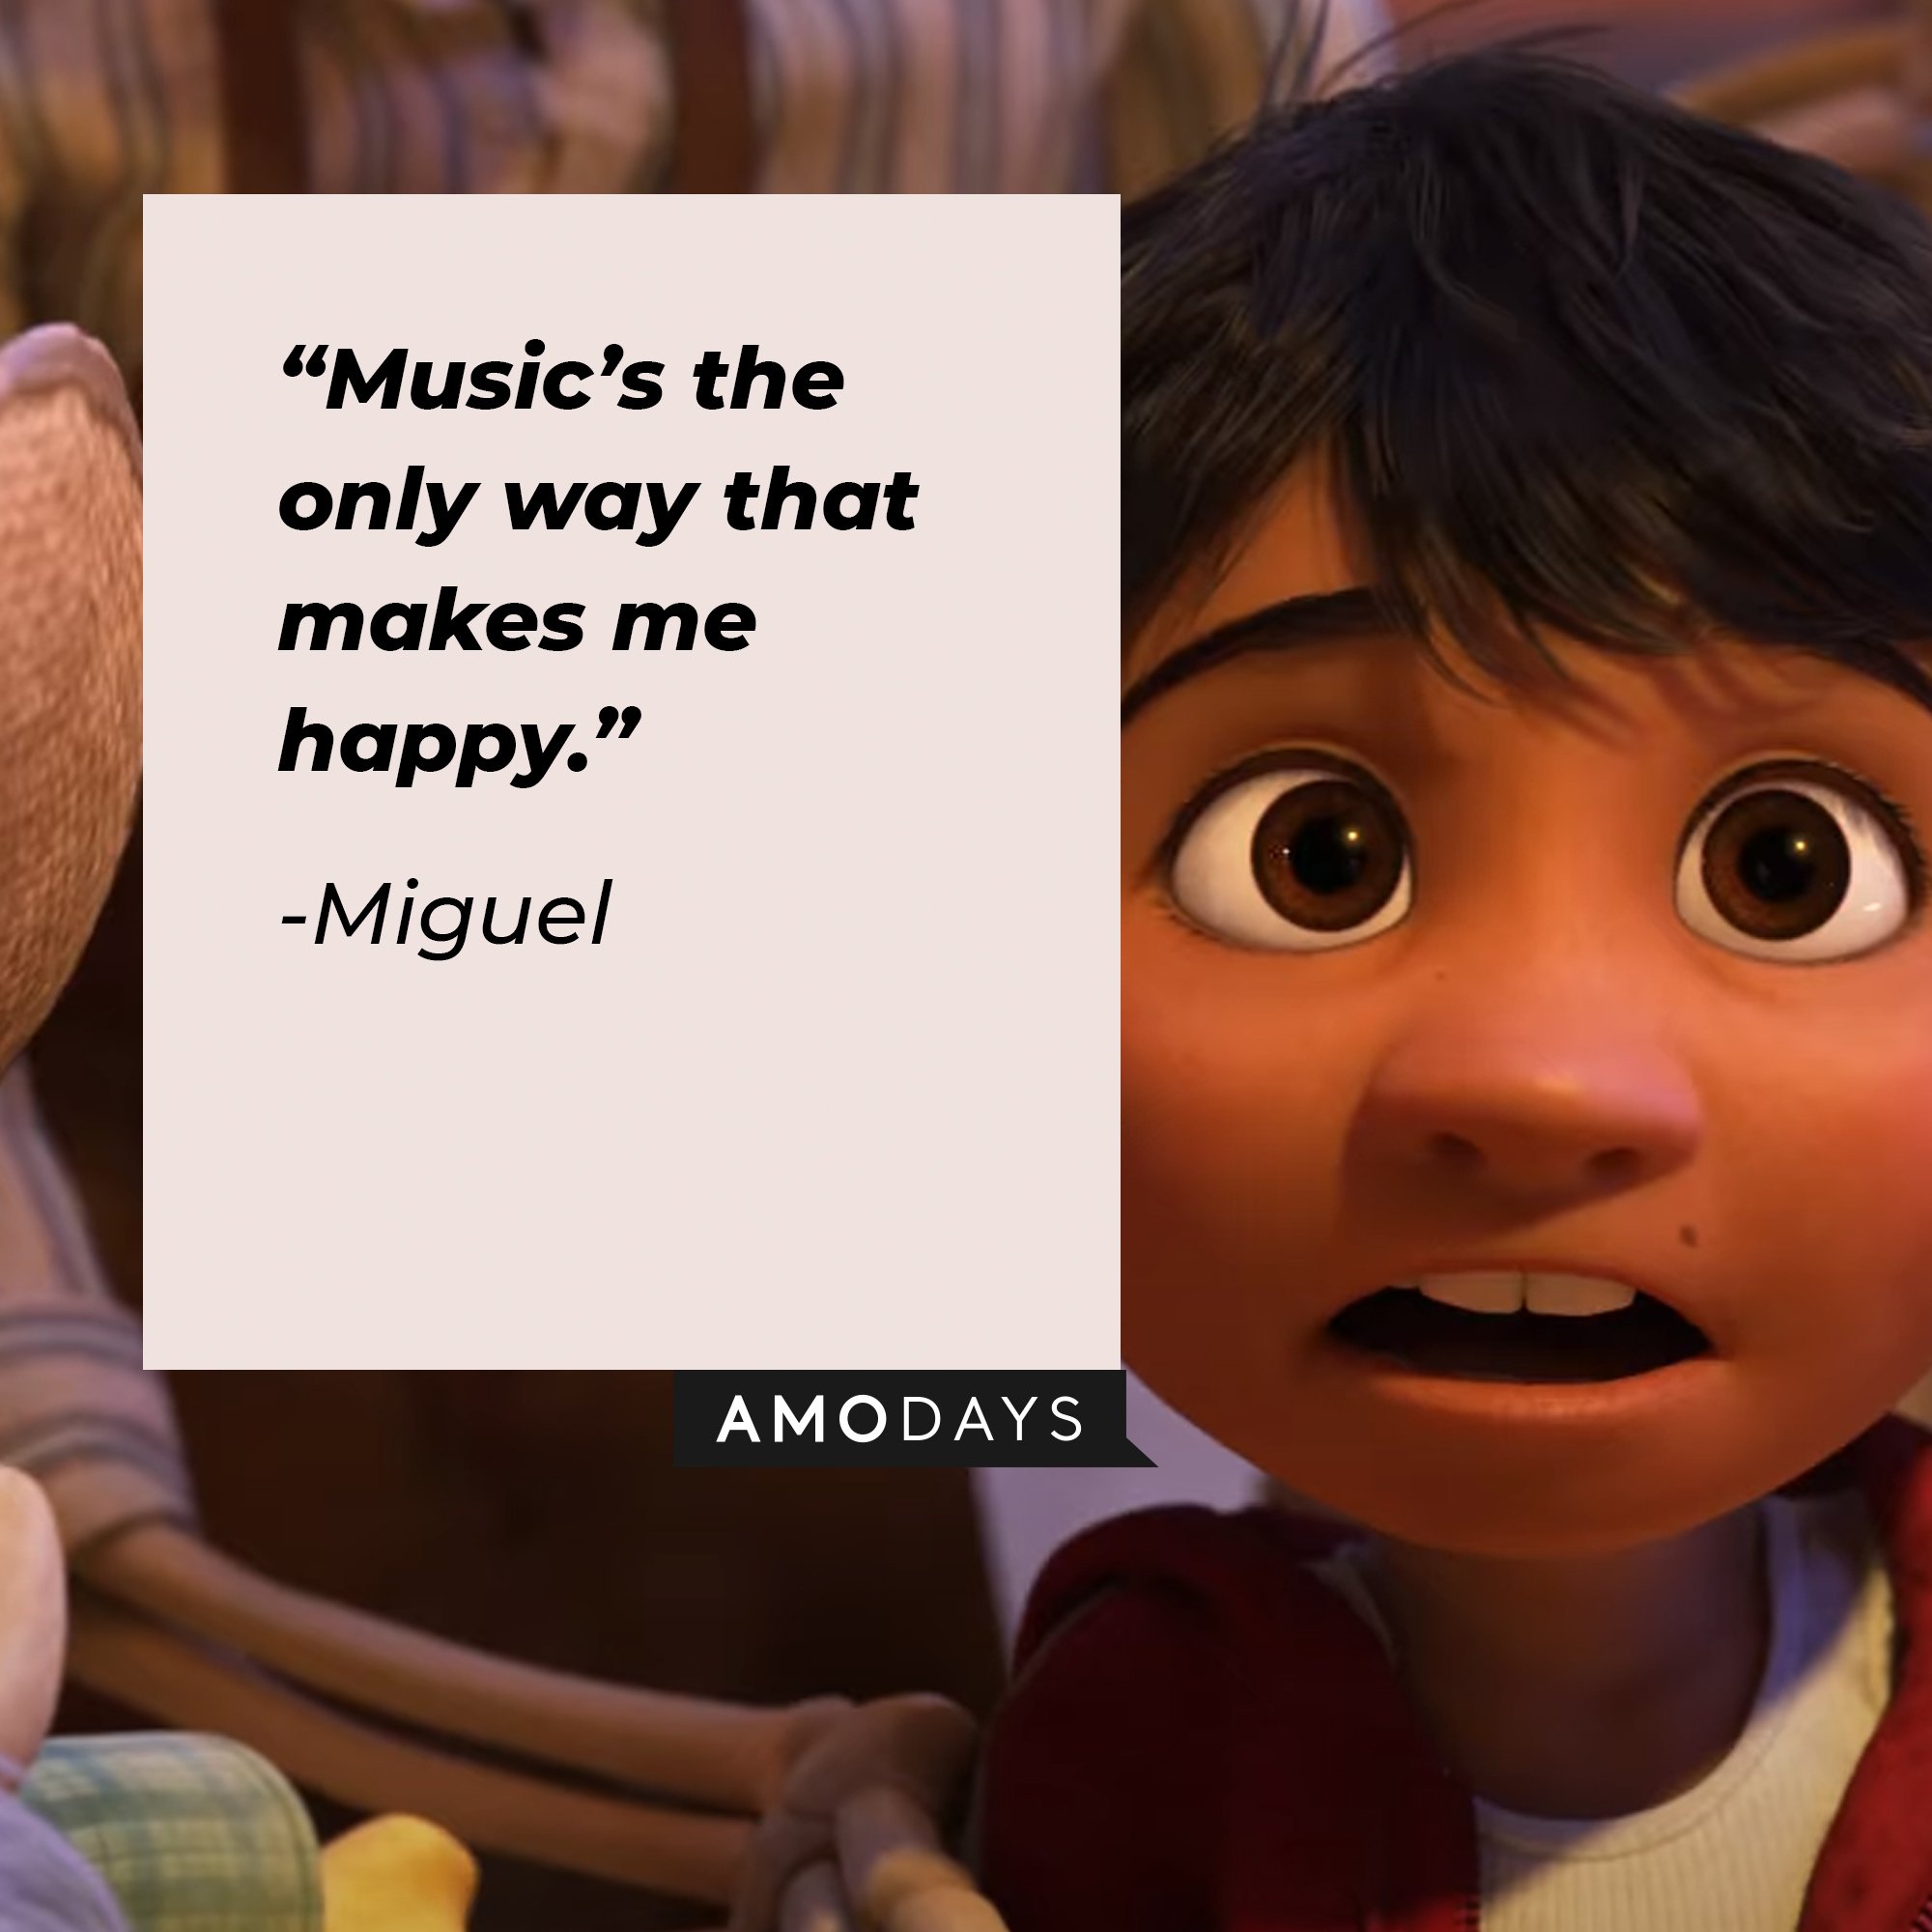 Miguel's quote: “Music’s the only way that makes me happy.” | Image: AmoDays